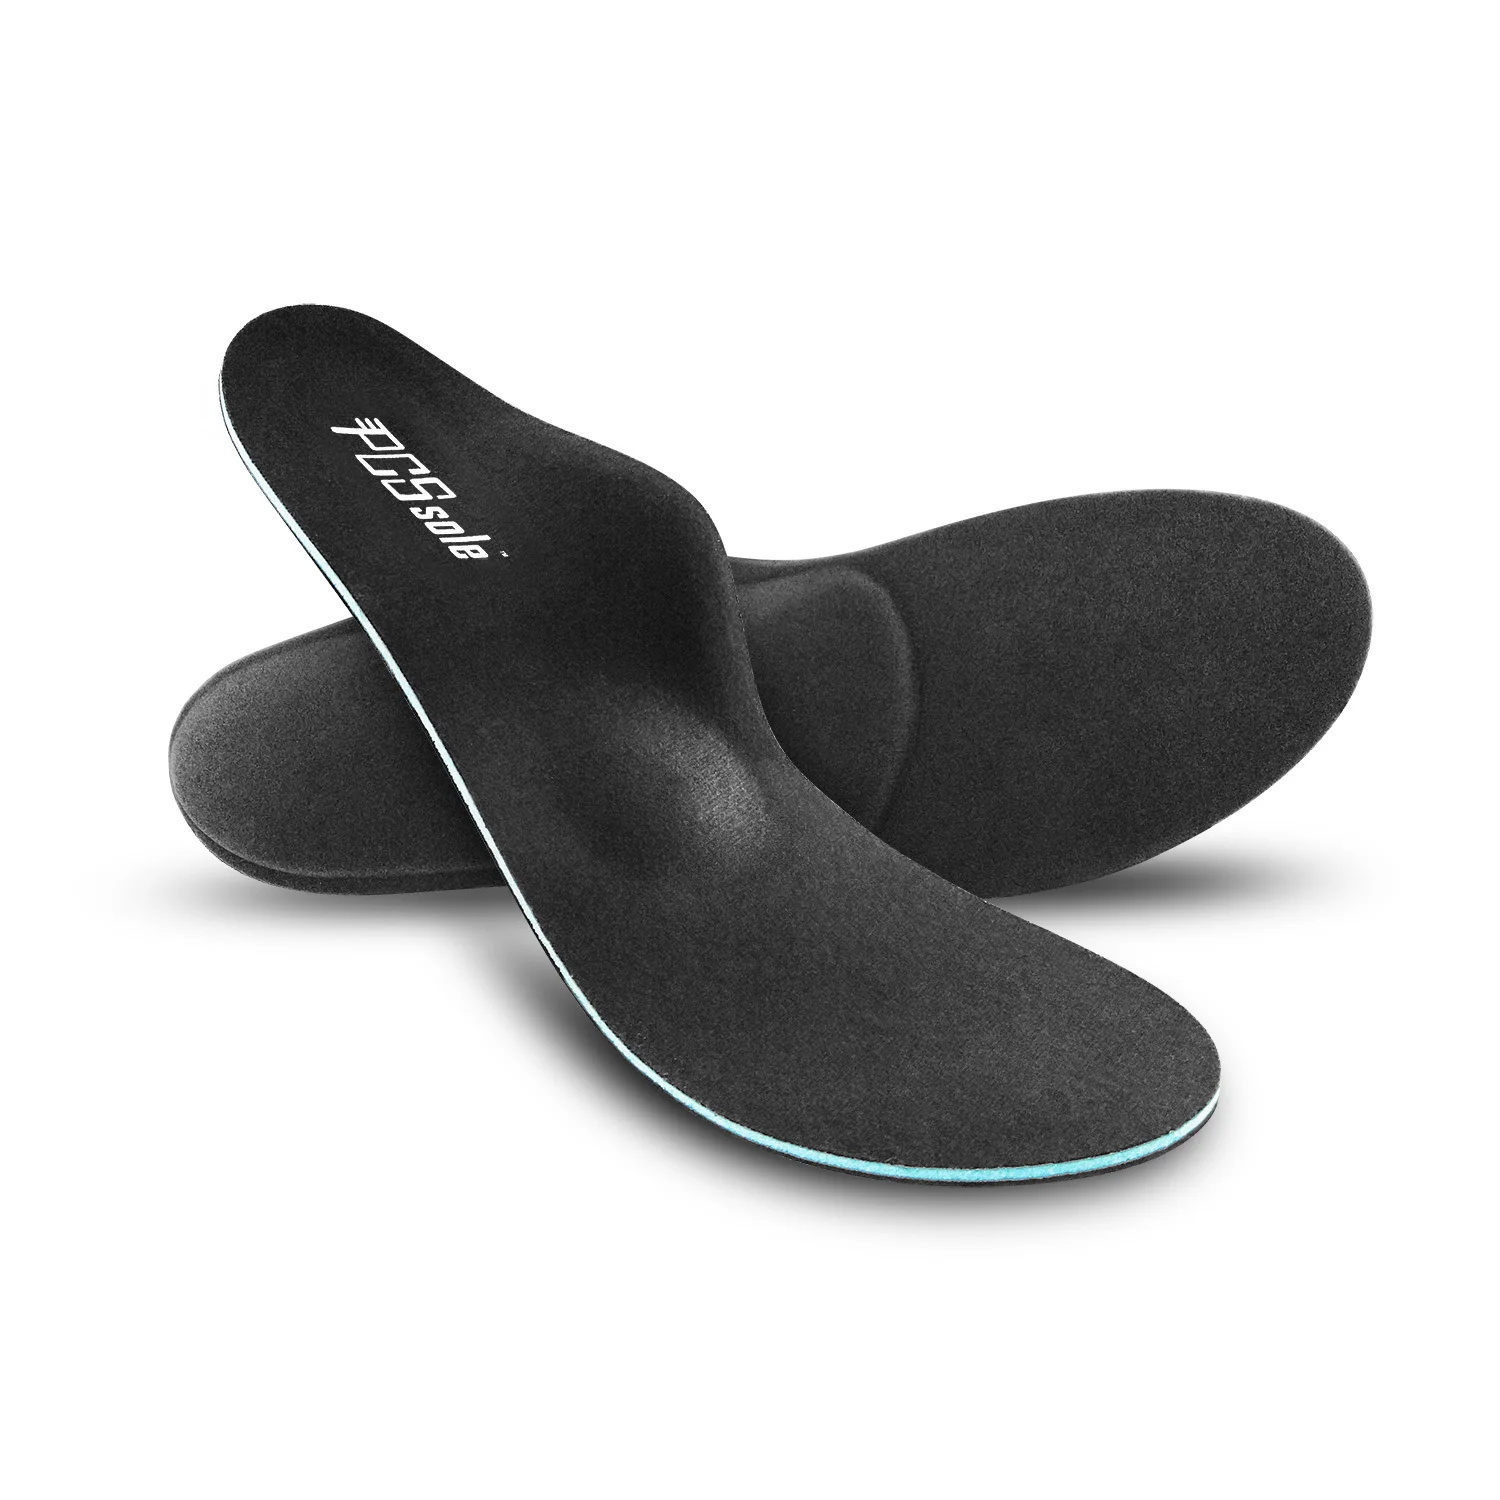 

OEM Custom Arch Support Flat Foot Orthopedic Sneaker Inserts sole Gel Orthotic Sports Shoes Insoles For Men Women, Customized